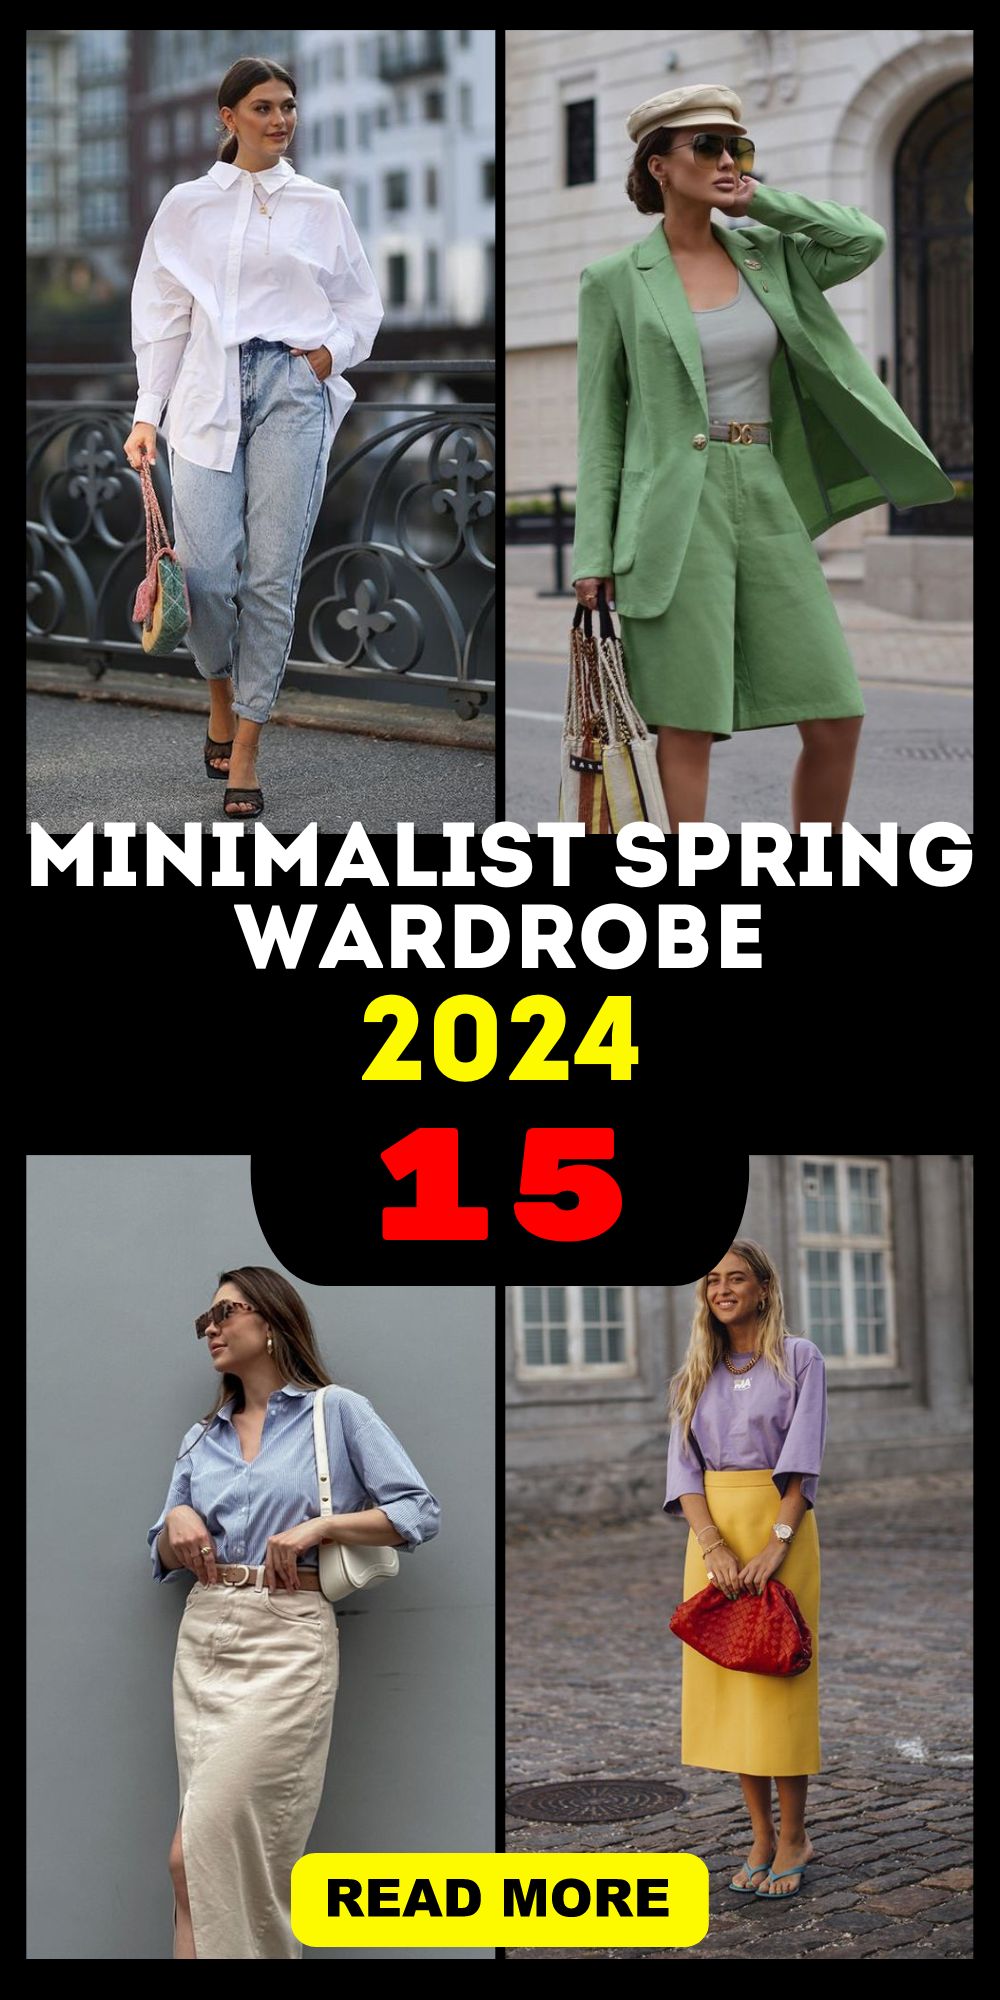 Build Your Minimalist Spring Wardrobe for 2024 - Chic & Sustainable